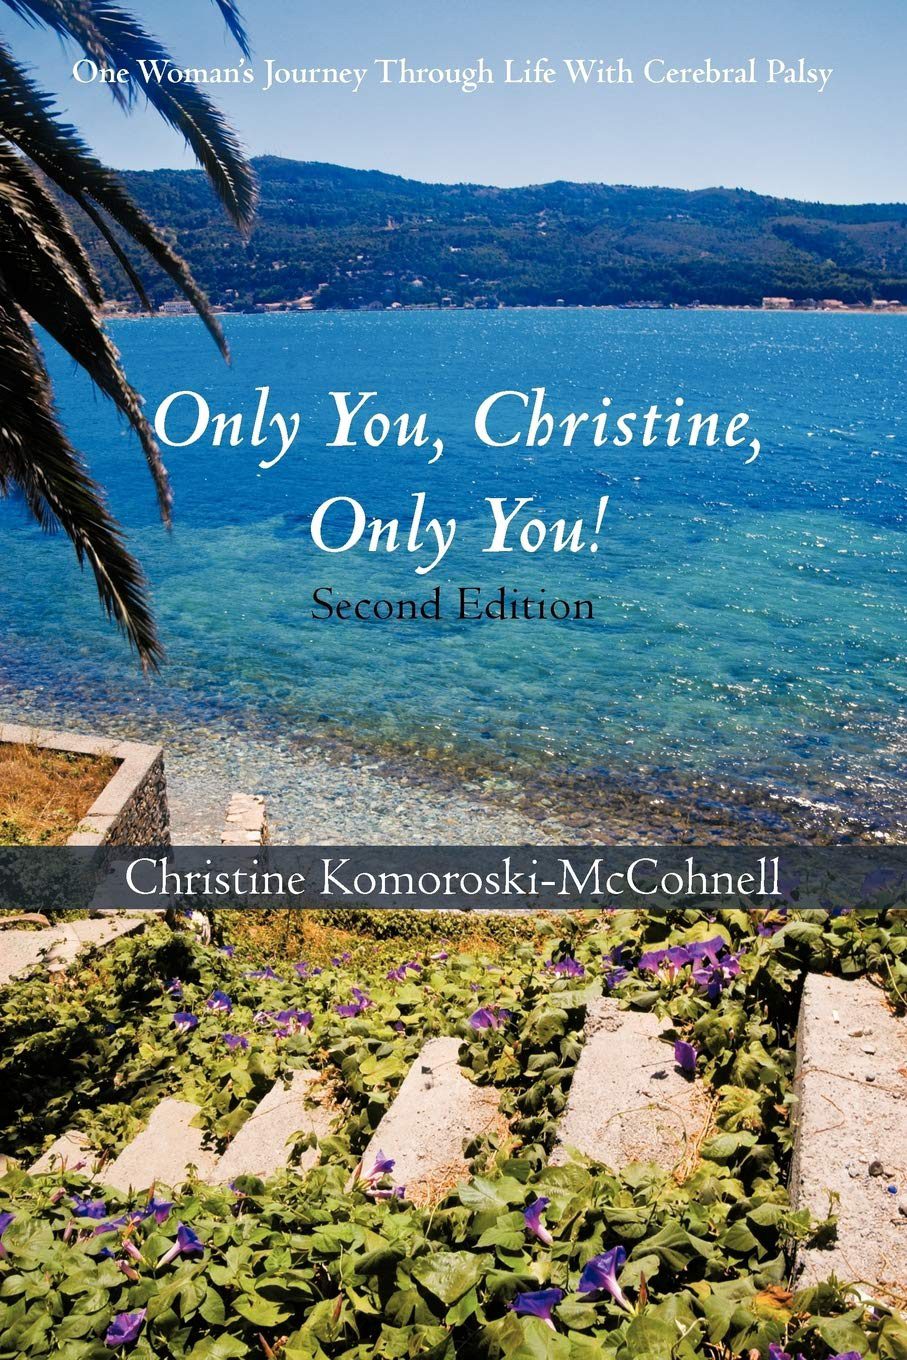 “Only You Christine, Only You!!” Book Excerpt